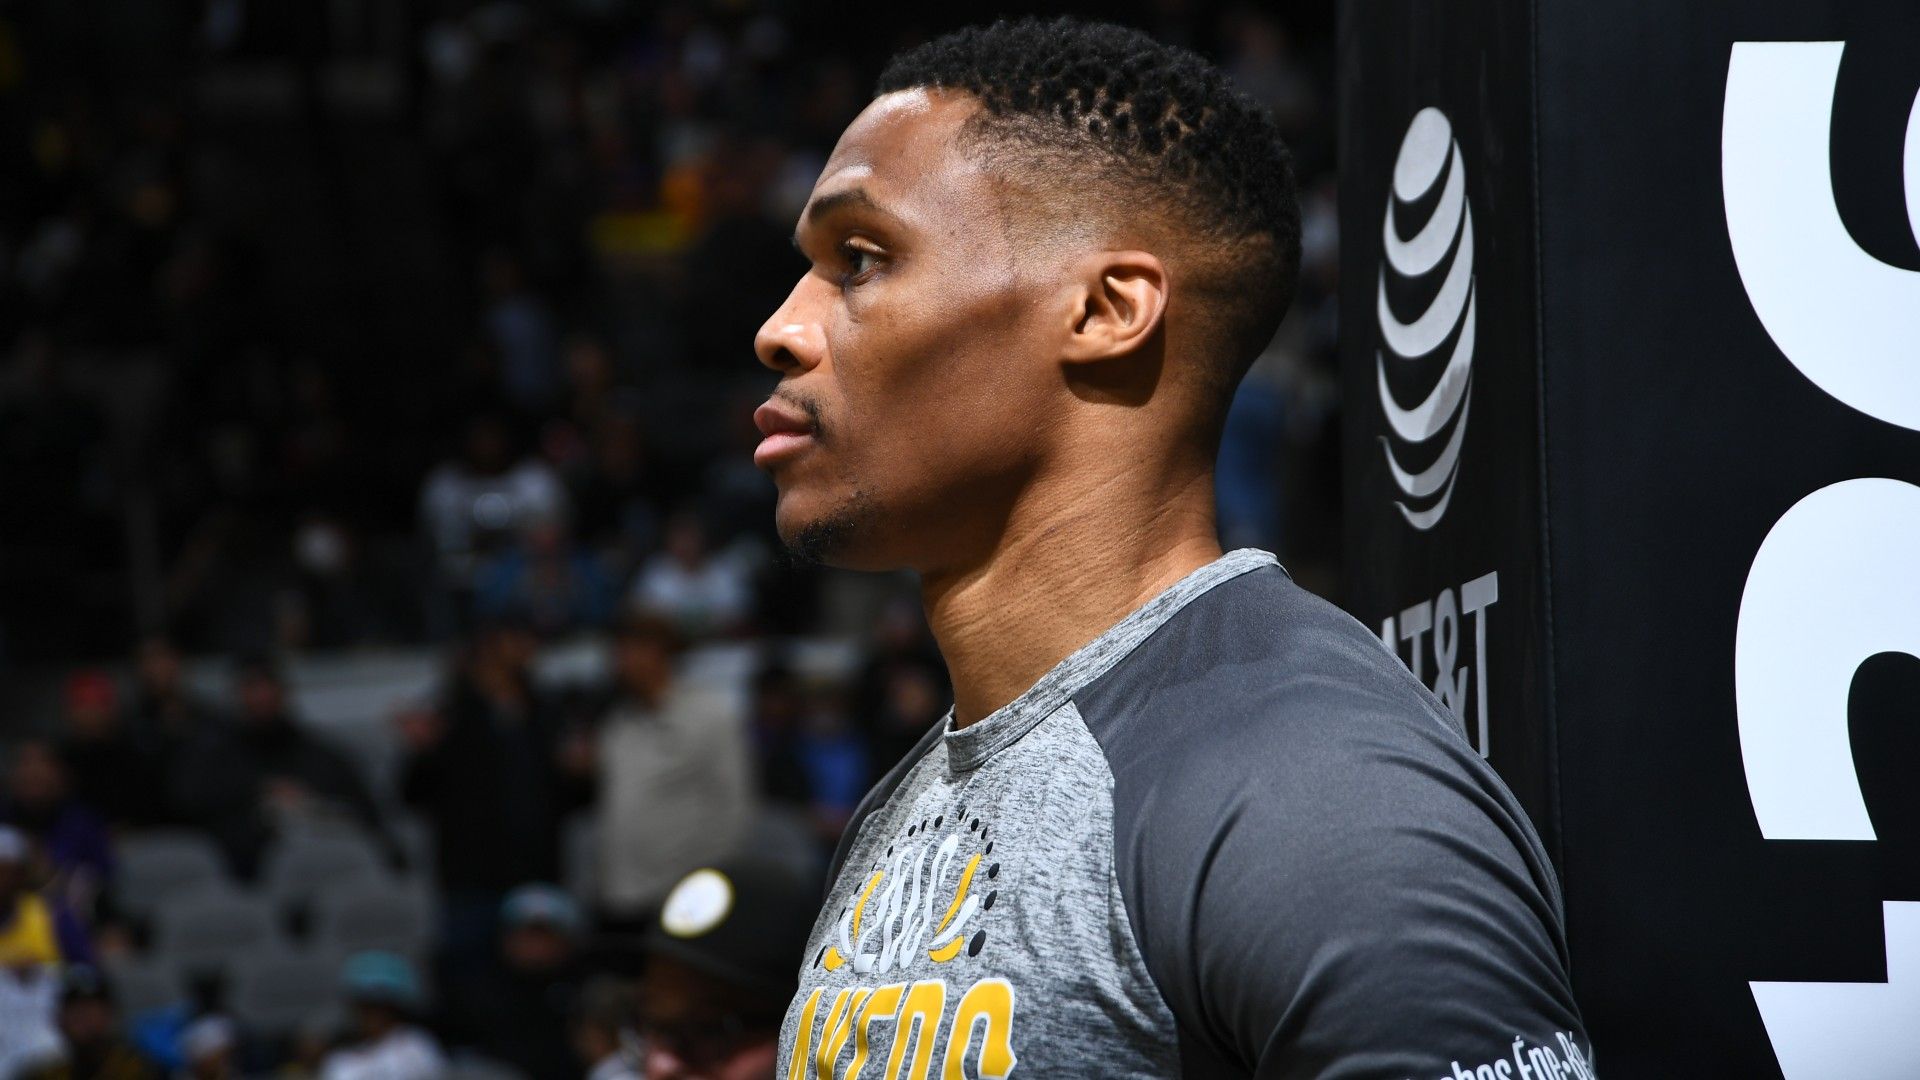 NBA star Russell Westbrook and wife Nina speak out against fan abuse